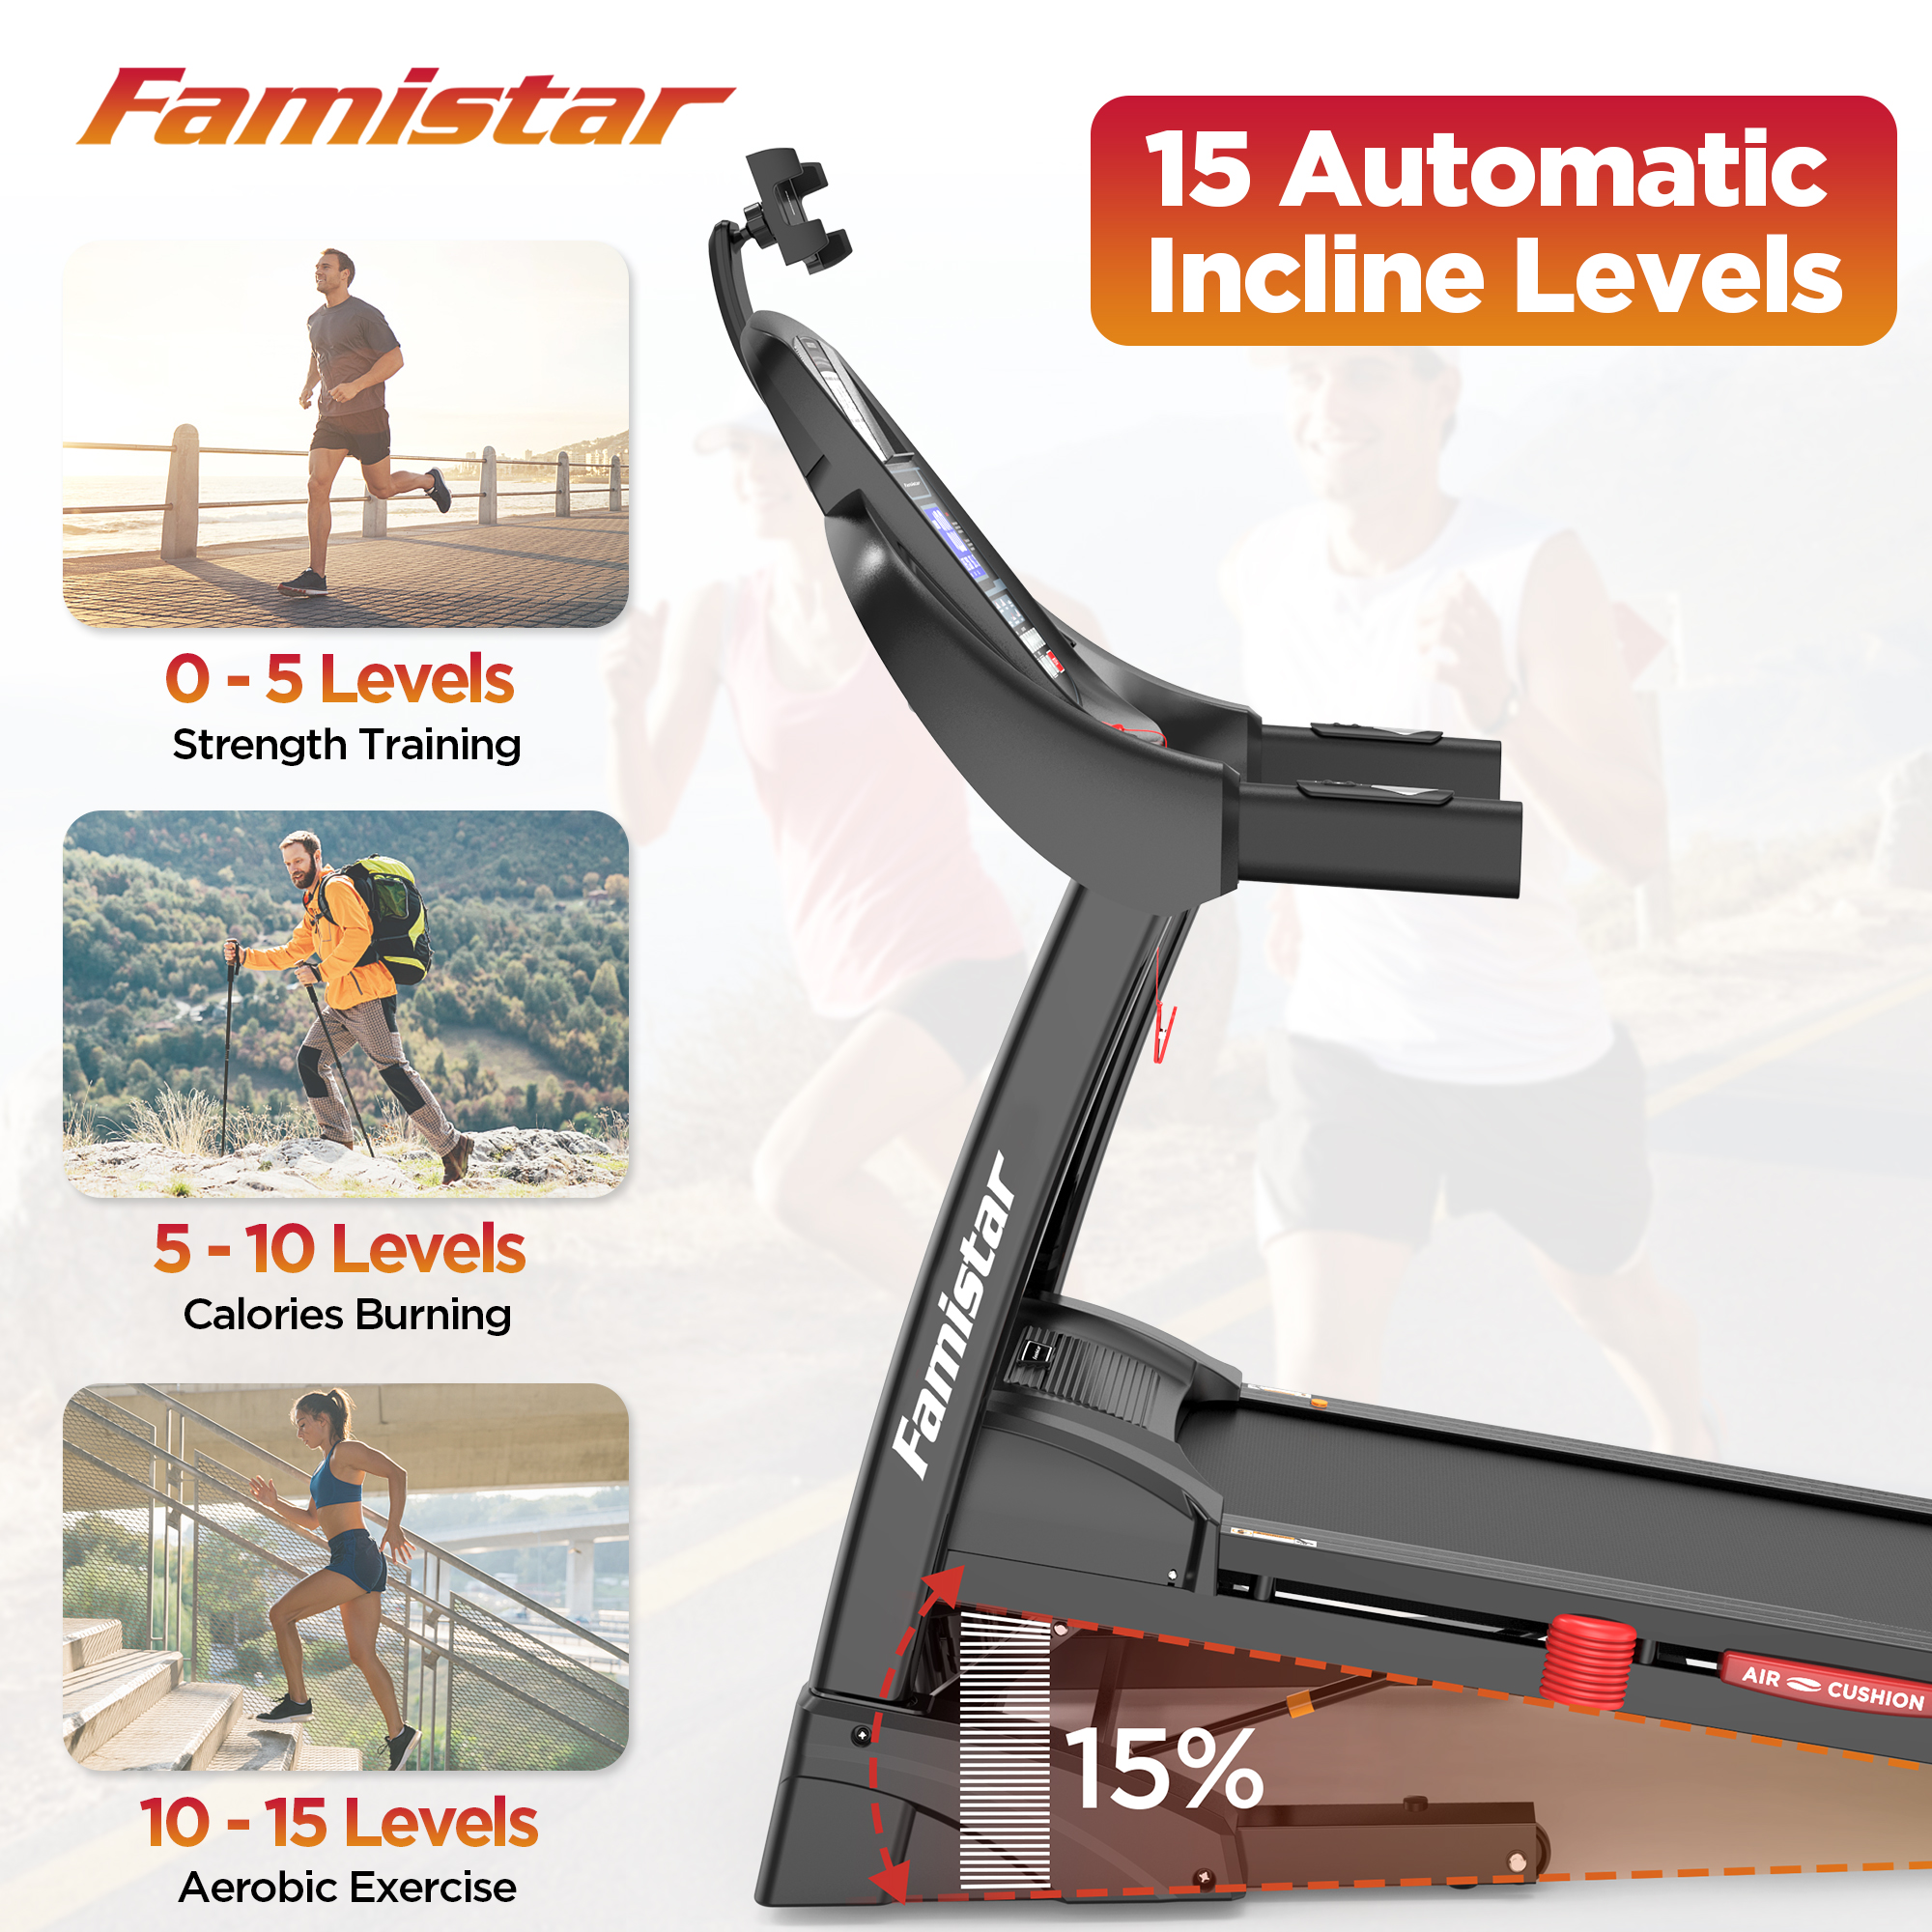 Famistar 4.5HP Portable Folding Treadmill 300 LB Capacity for Home w/ 15-Level Auto Incine, Smart APP Control, HiFi Stereo Bluetooth Speakers, 64 Programs, Up to 10MPH Speed, Knee Strap Gift - image 3 of 14